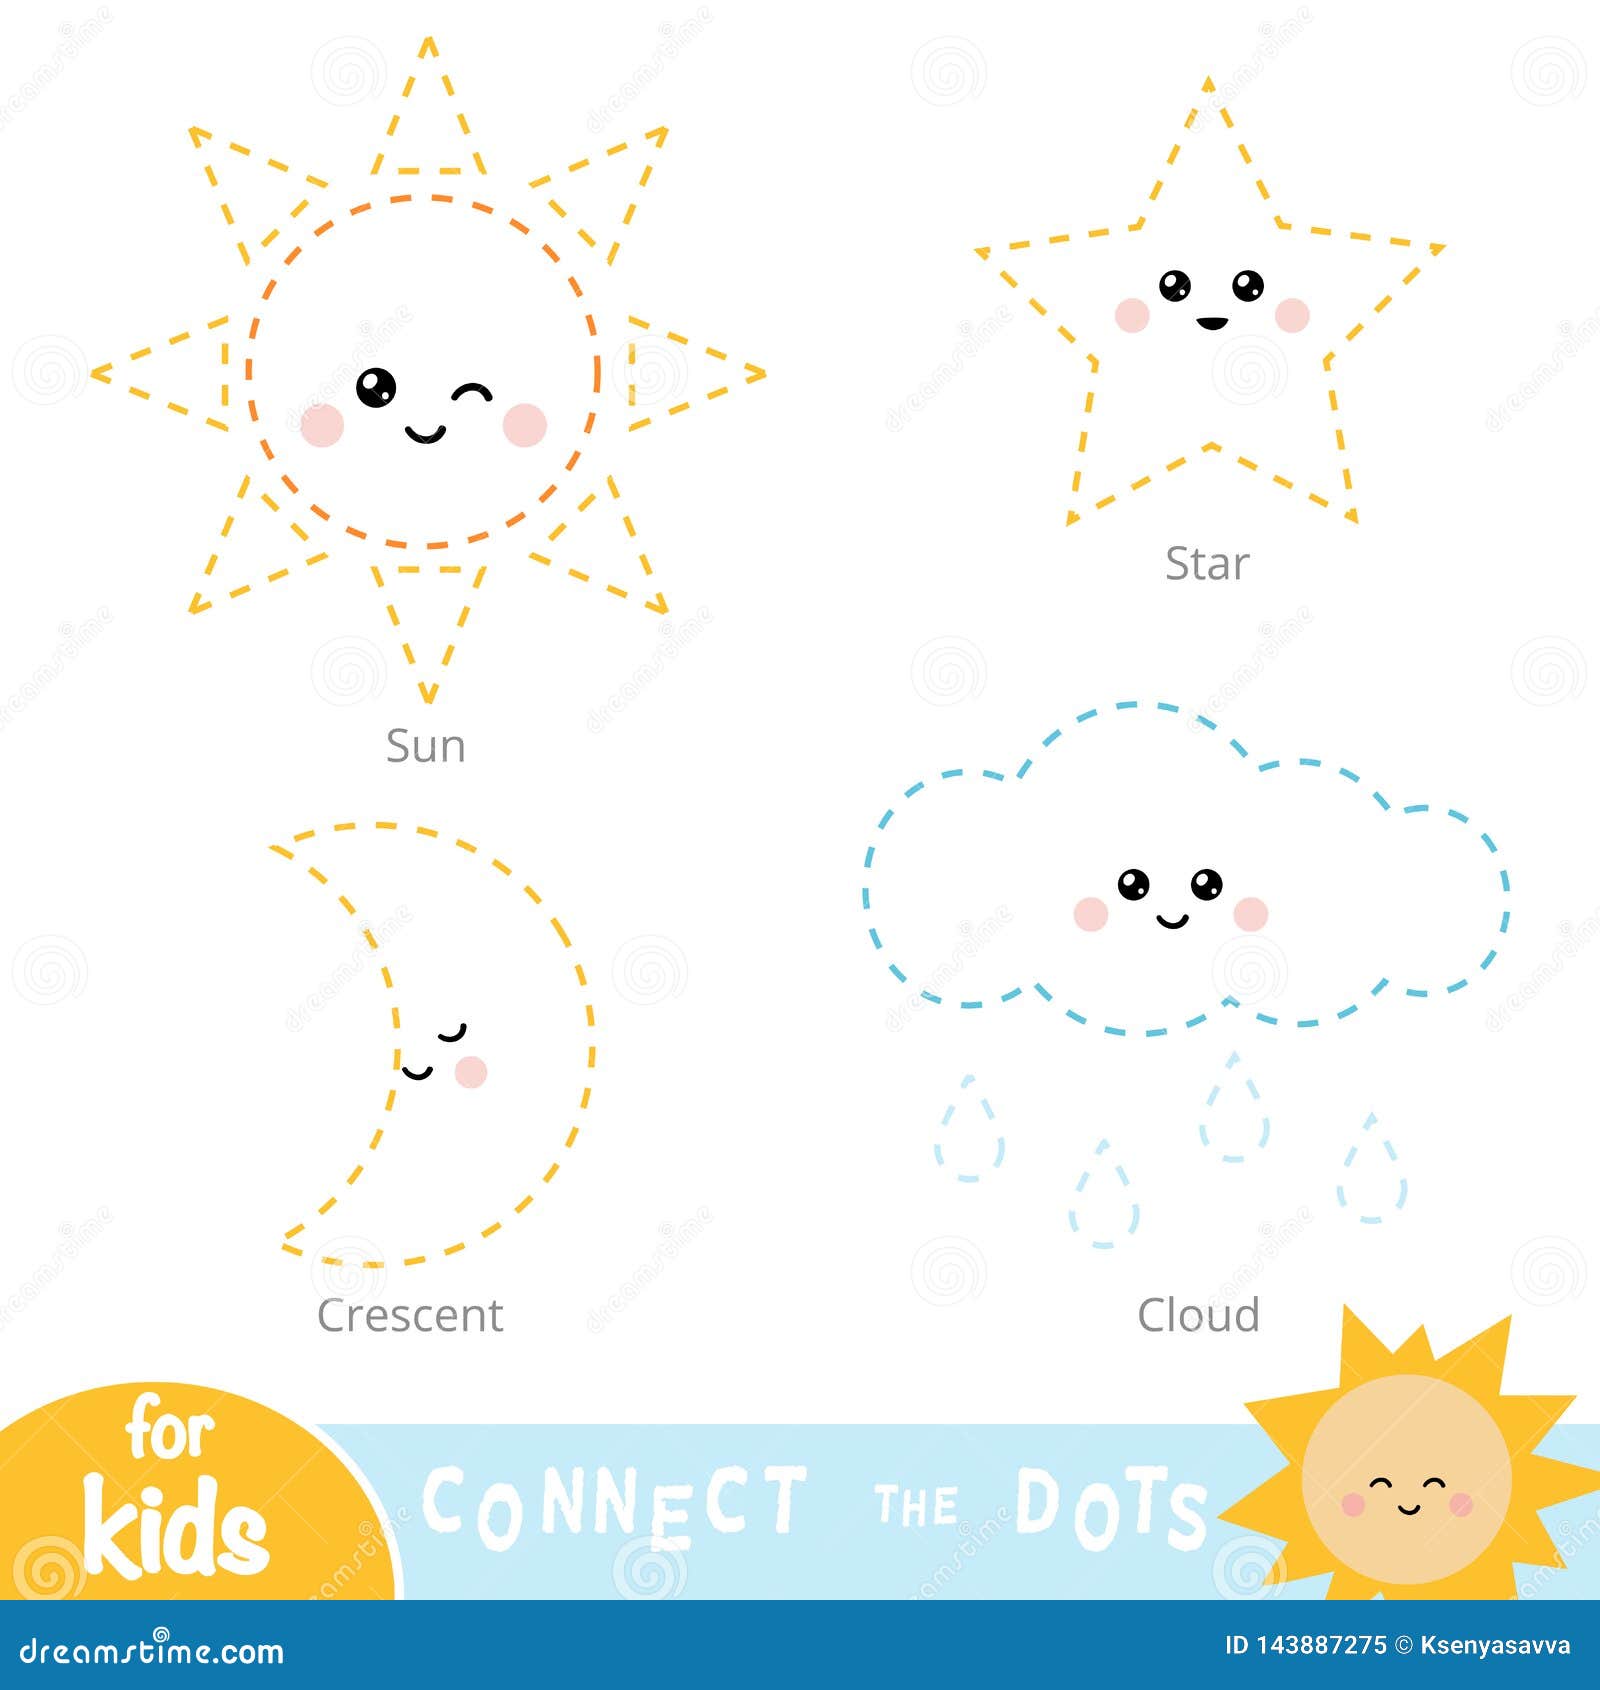 connect the dots, education game for children. set of nature items